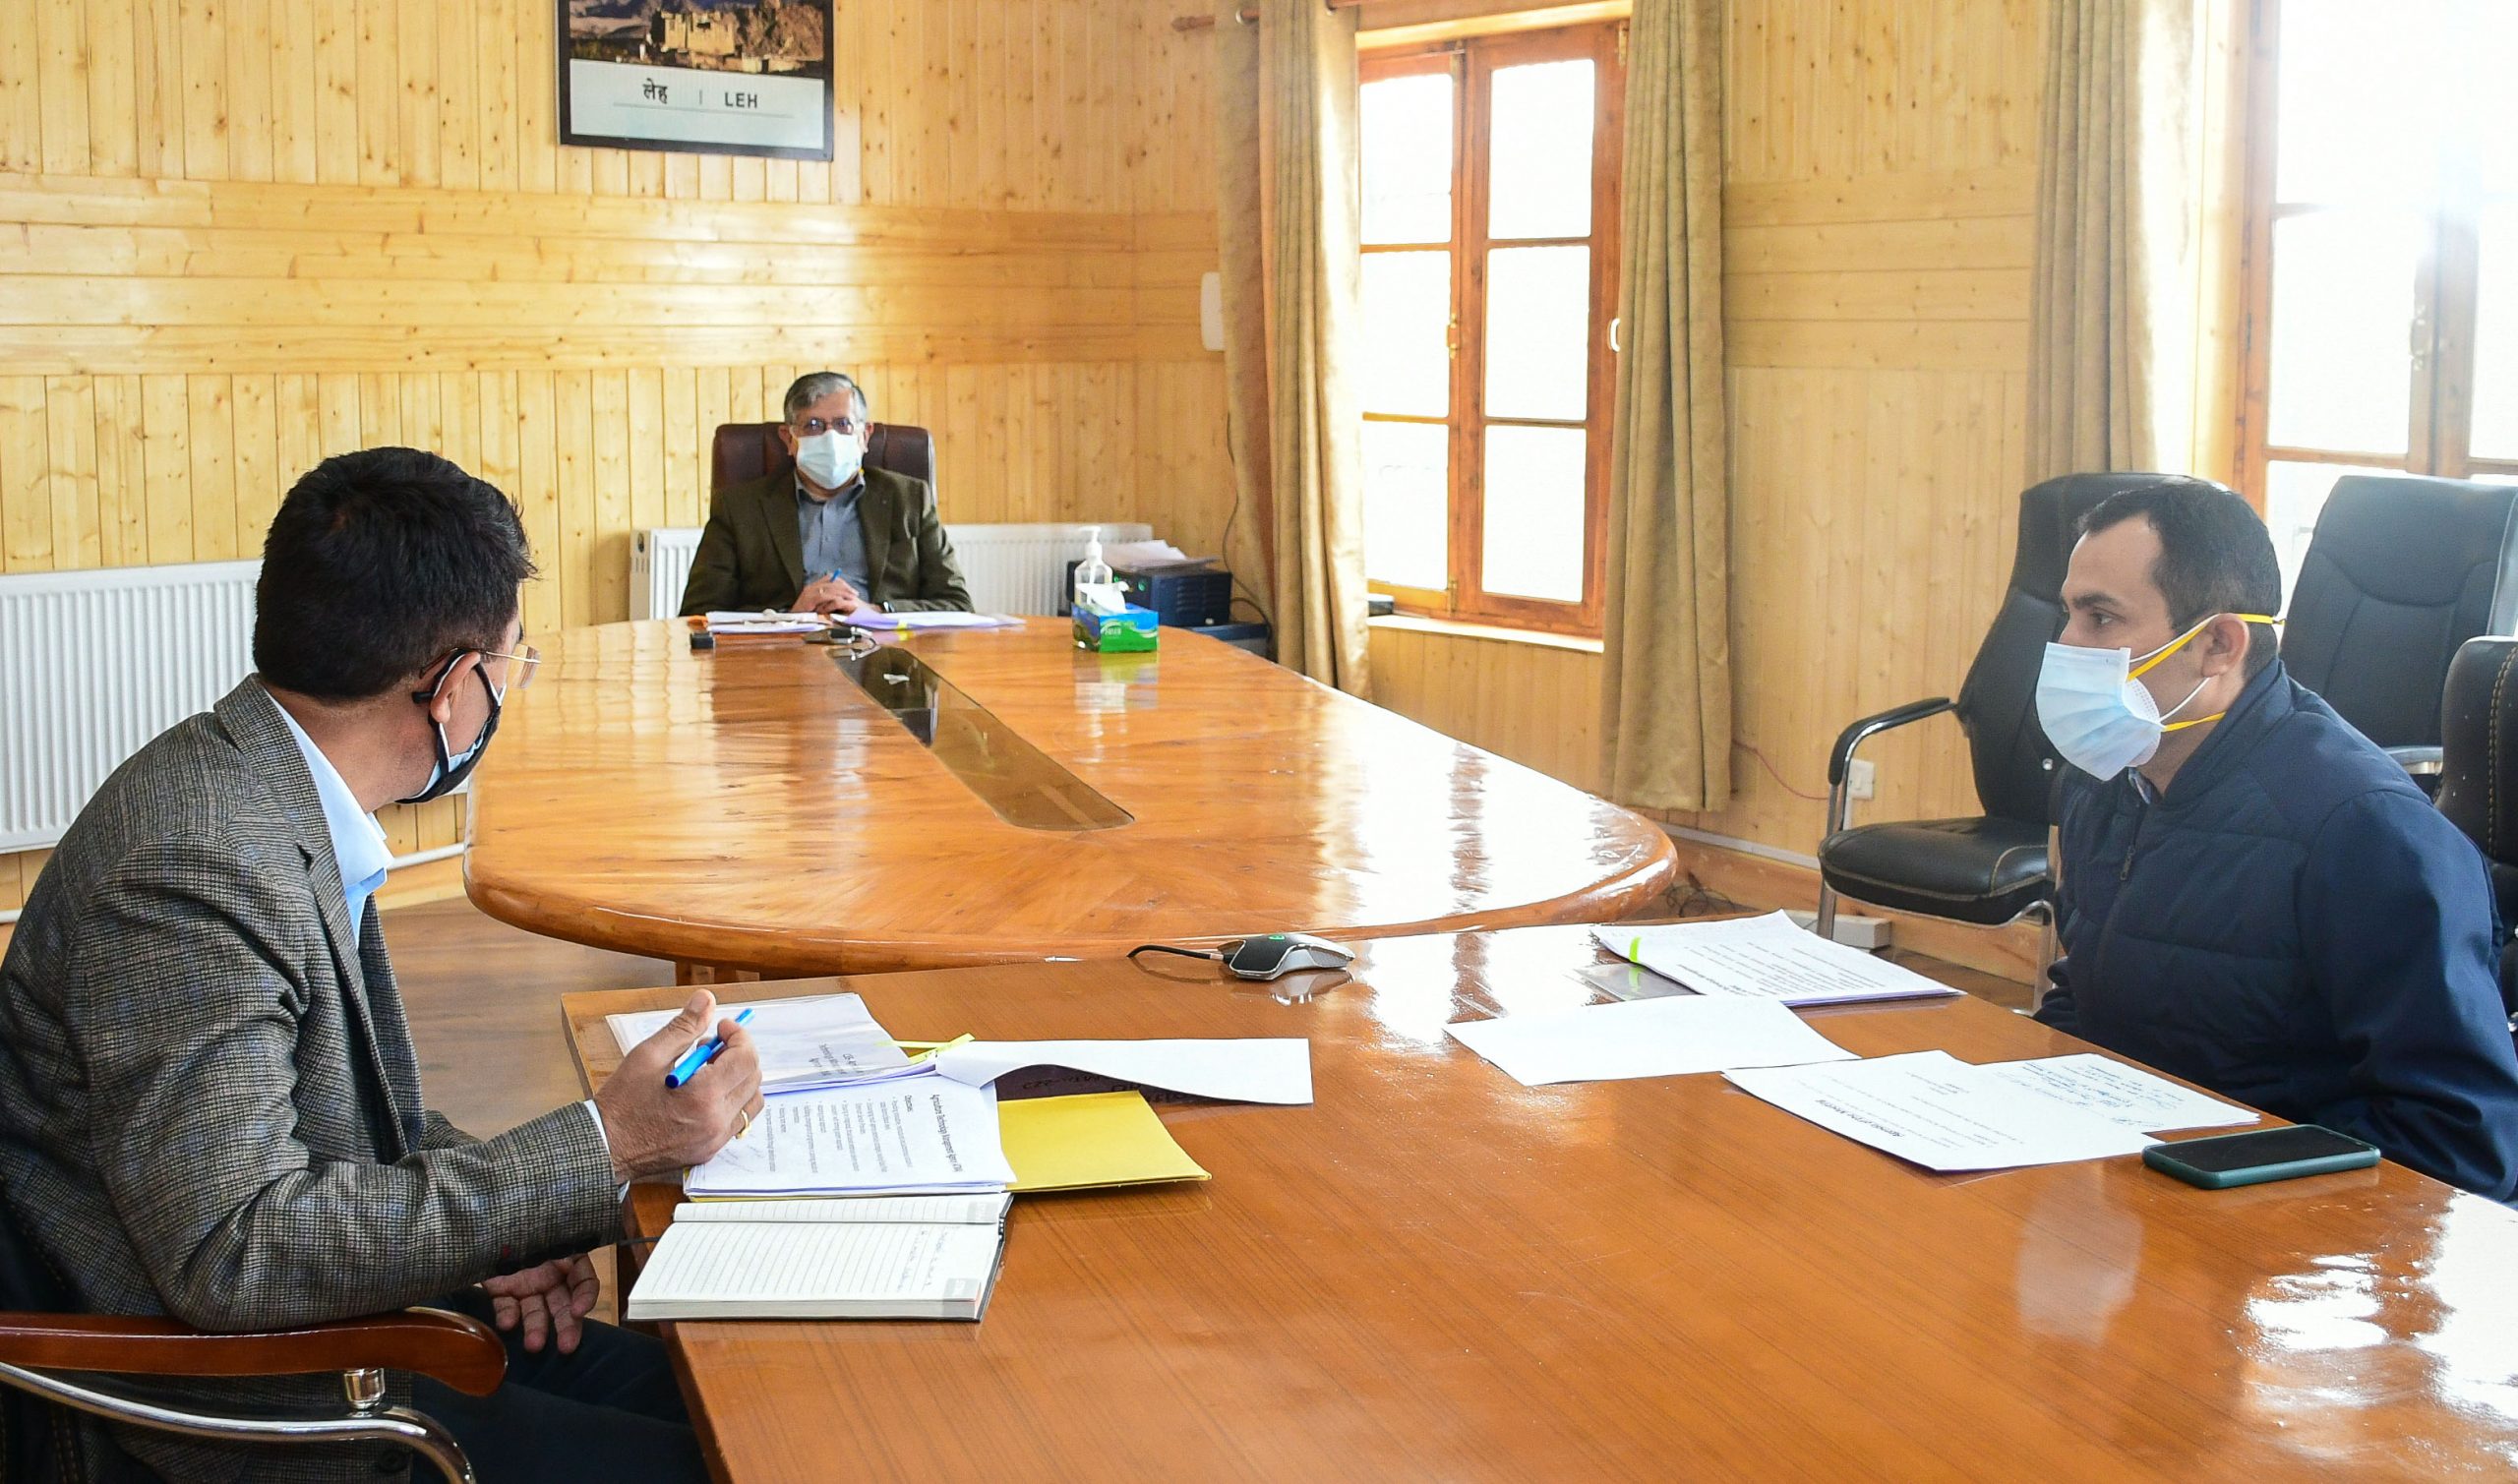 Ladakh Approval & Monitoring Committee approves Rs 4.7 crore Annual Action Plan under ATMA & PMKSY